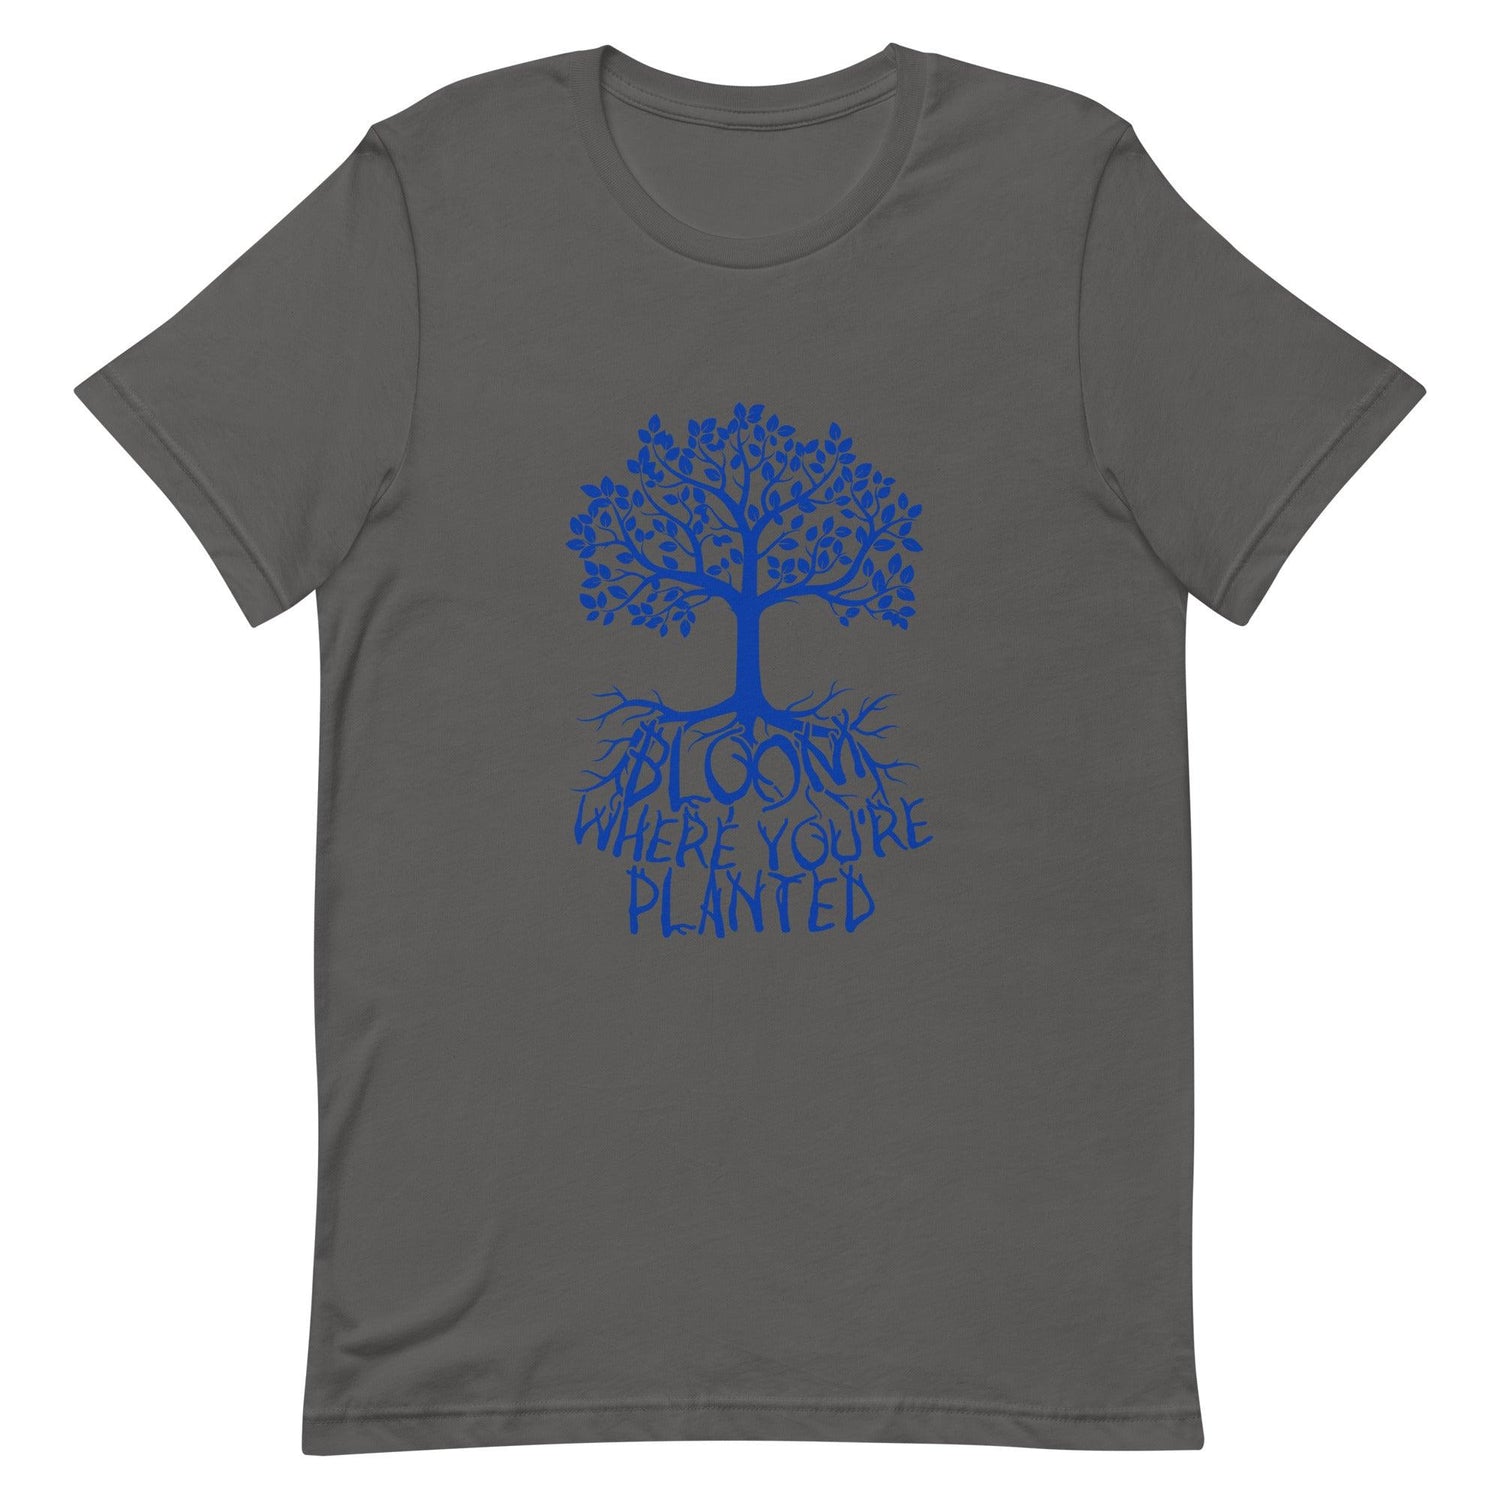 Nate Sestina "Where You're Planted" t-shirt - Fan Arch